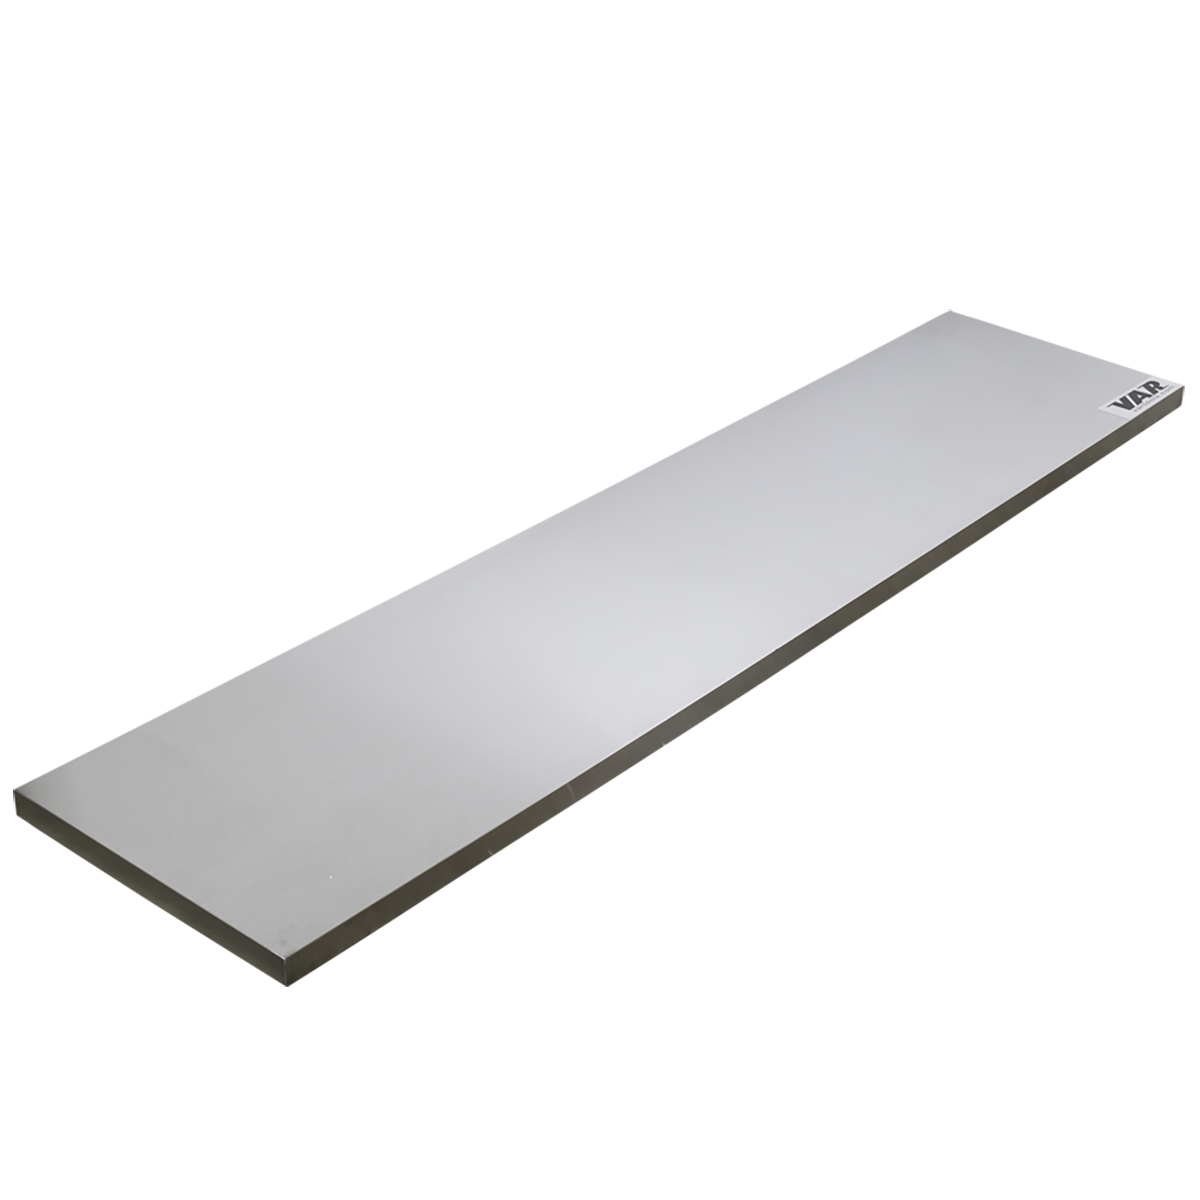 Stainless steel bench top for 3 units -  length 204cm